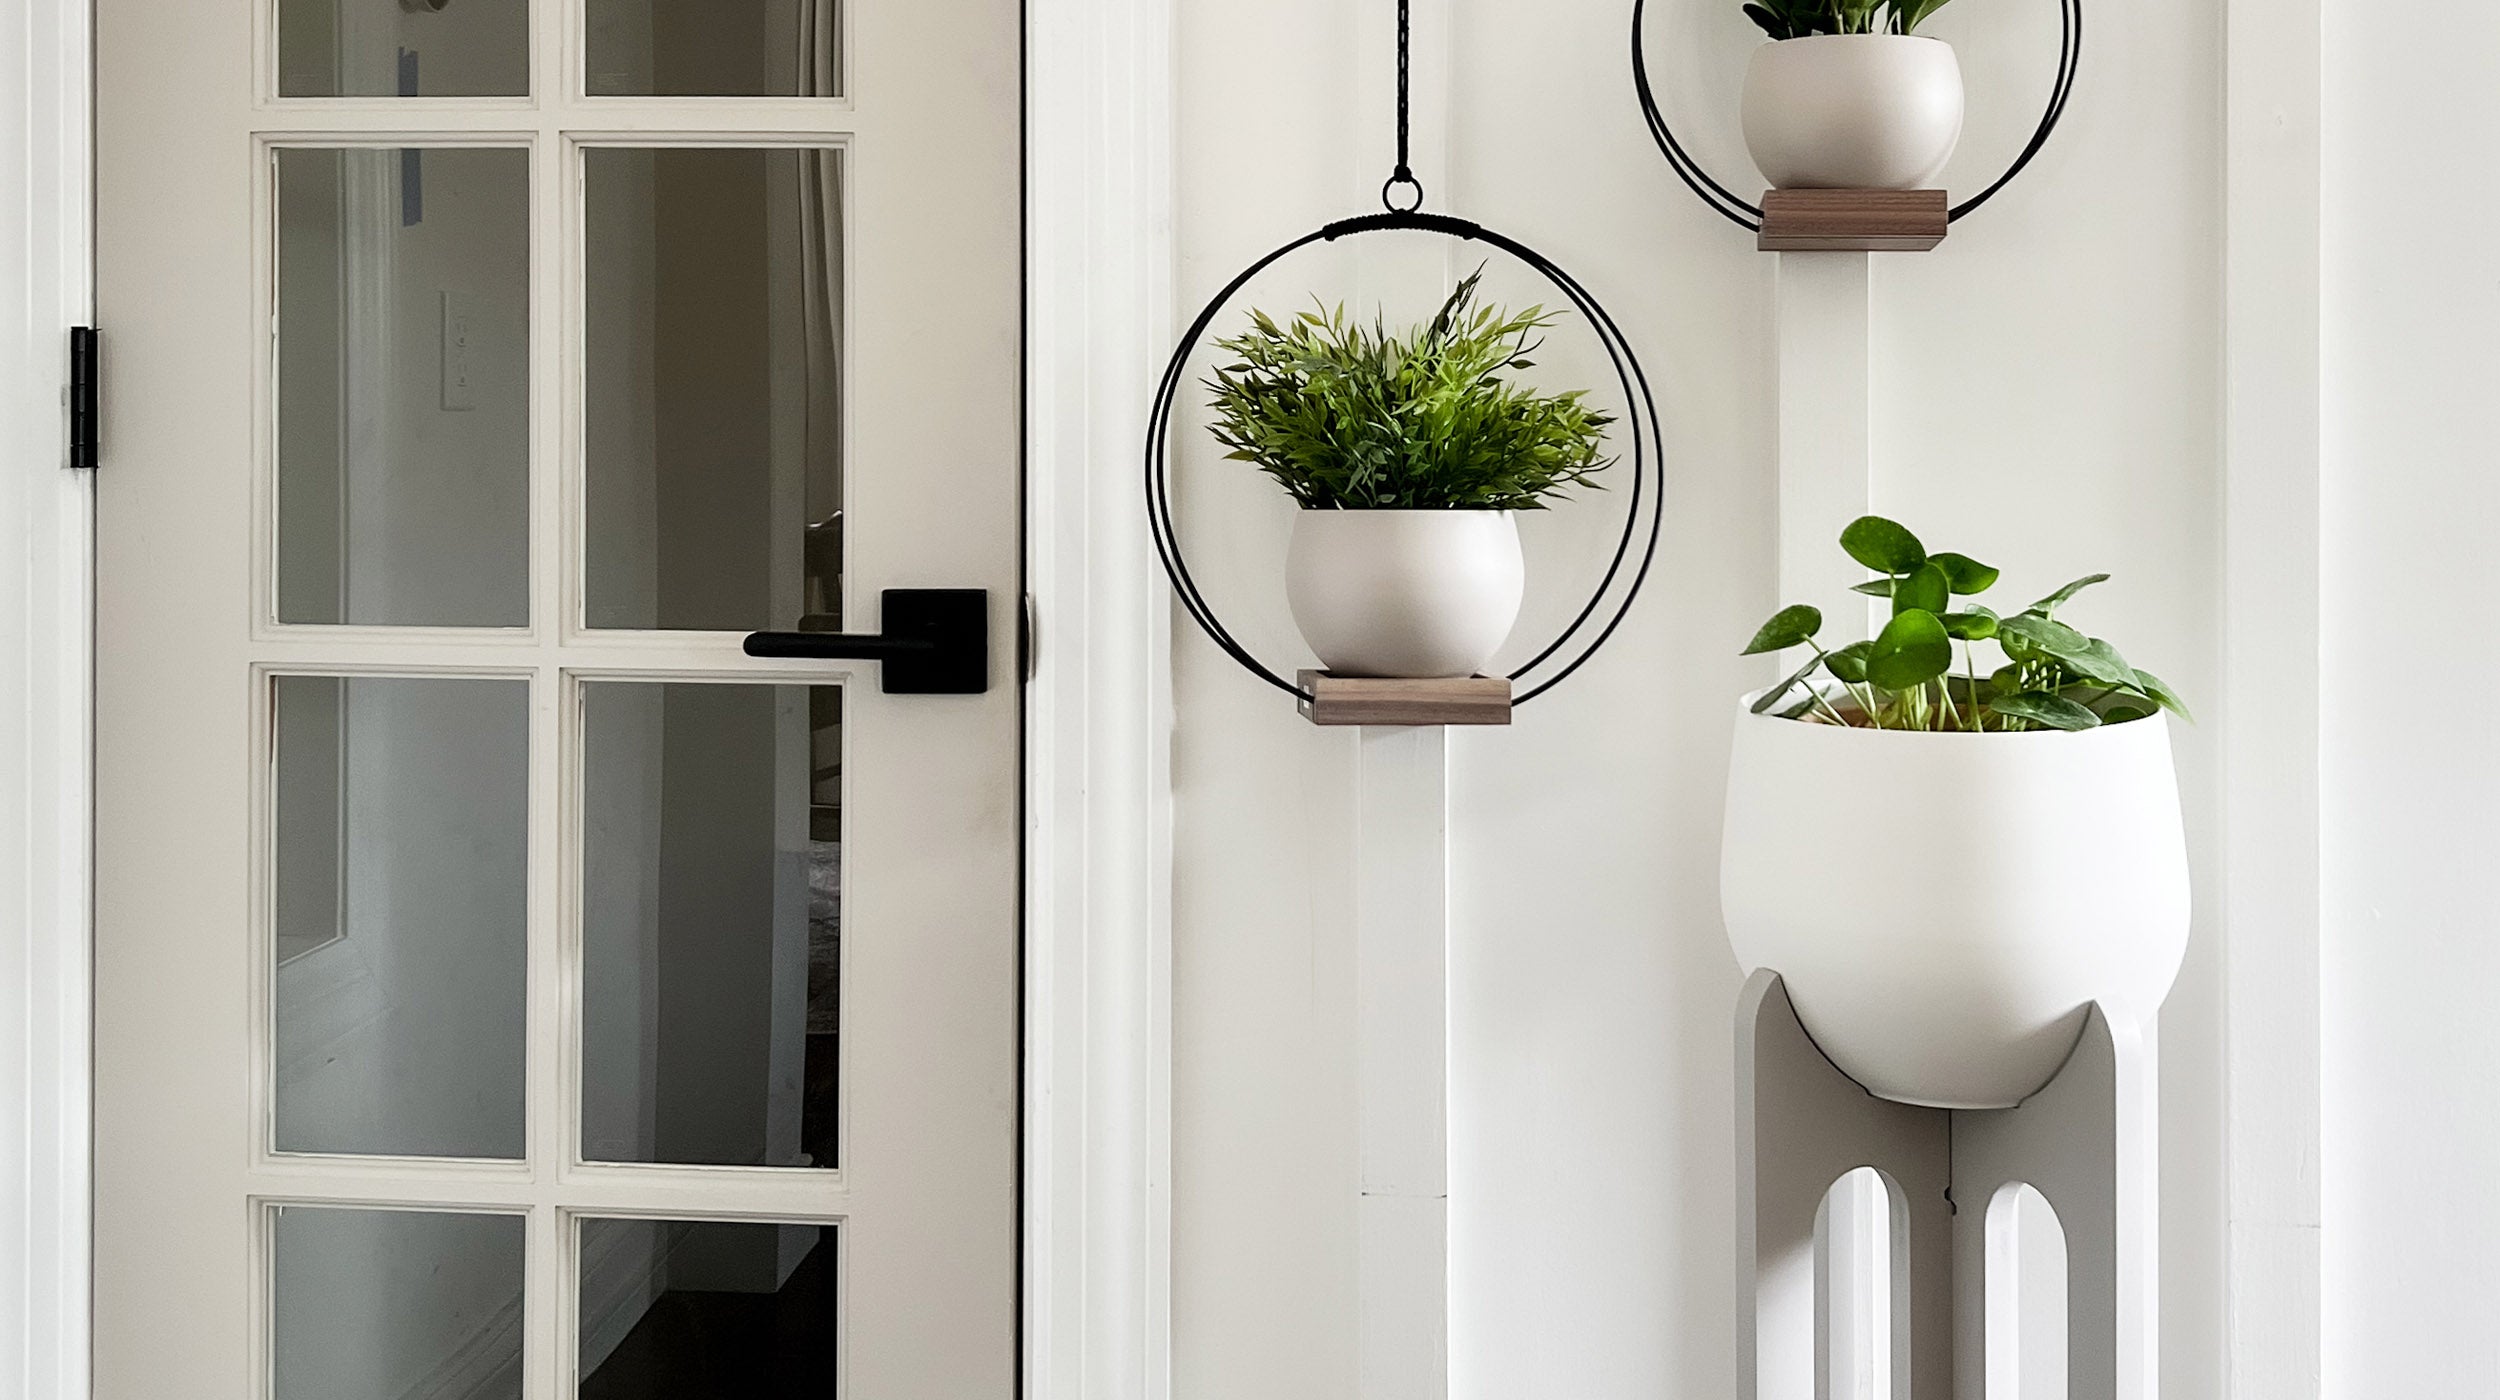 braid & wood hanging planters and plant stand styled next to entry door